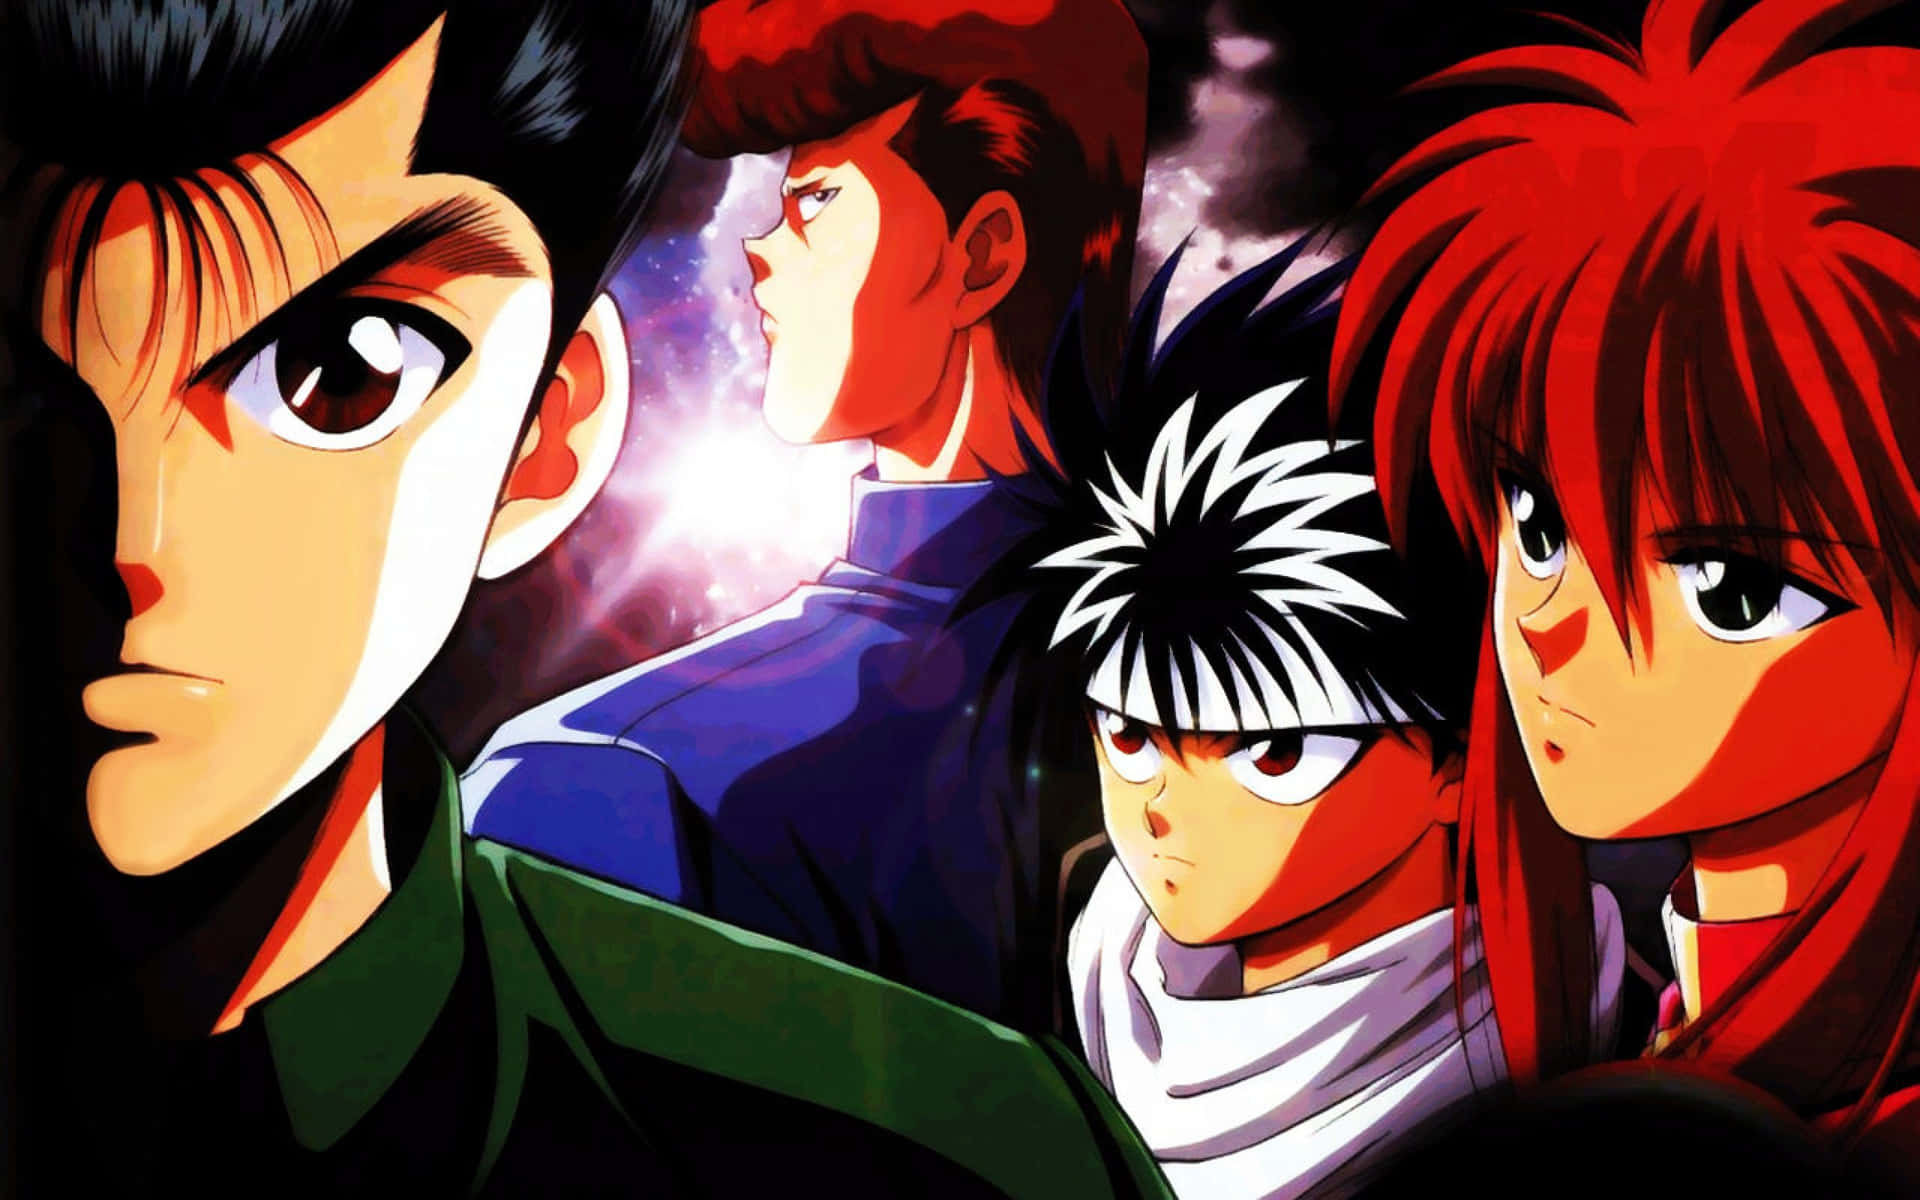 "Ready for action? Yusuke Urameshi is in pursuit of the elusive criminal, Toguro!"